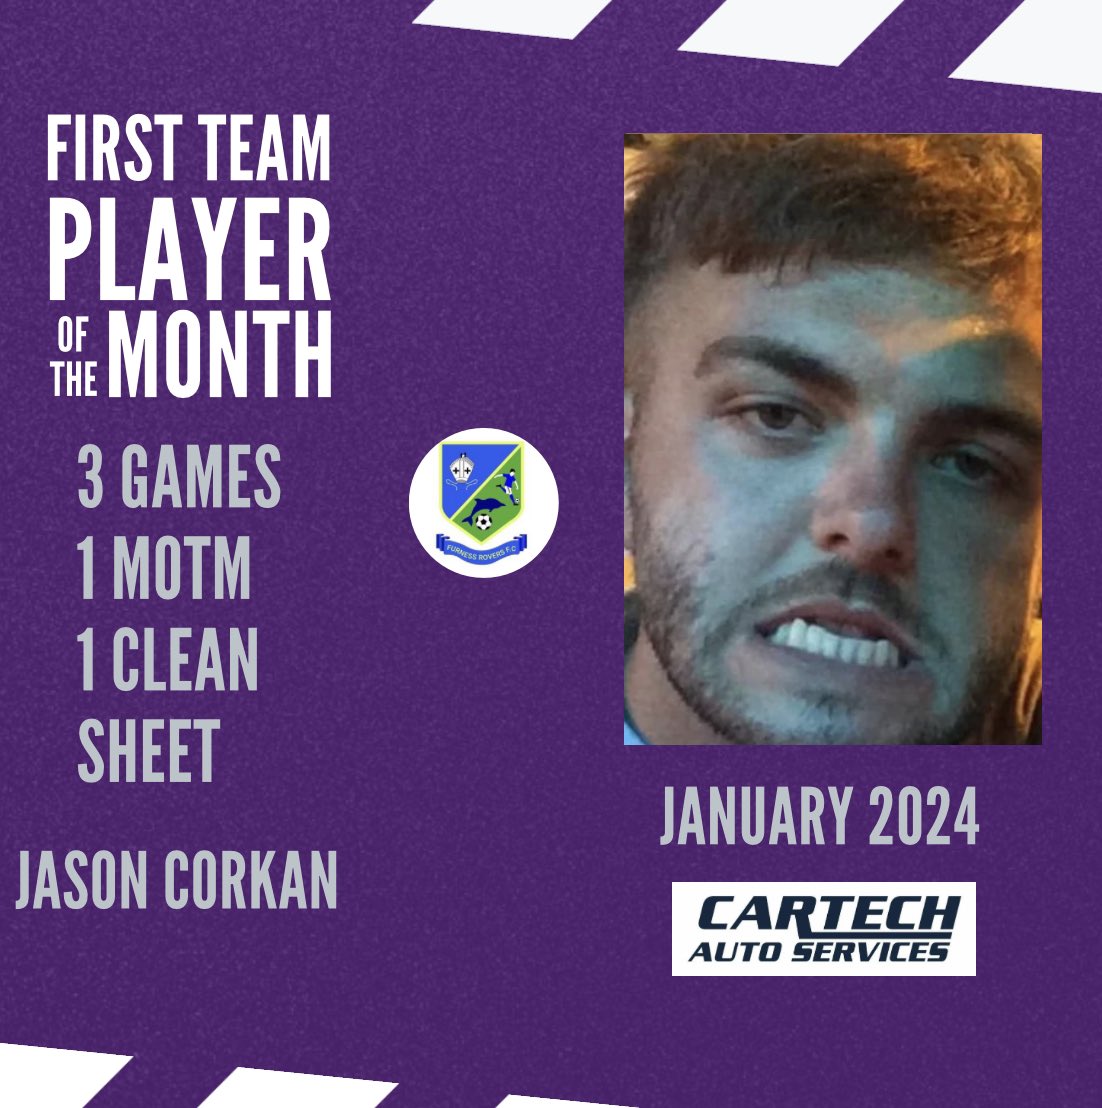 First Team Player of the Month: @Jase015 Solid month for Jase finally playing every game in a month for the first time since 2014. Diet seems to be working a treat, translating into solid performances. 🐬